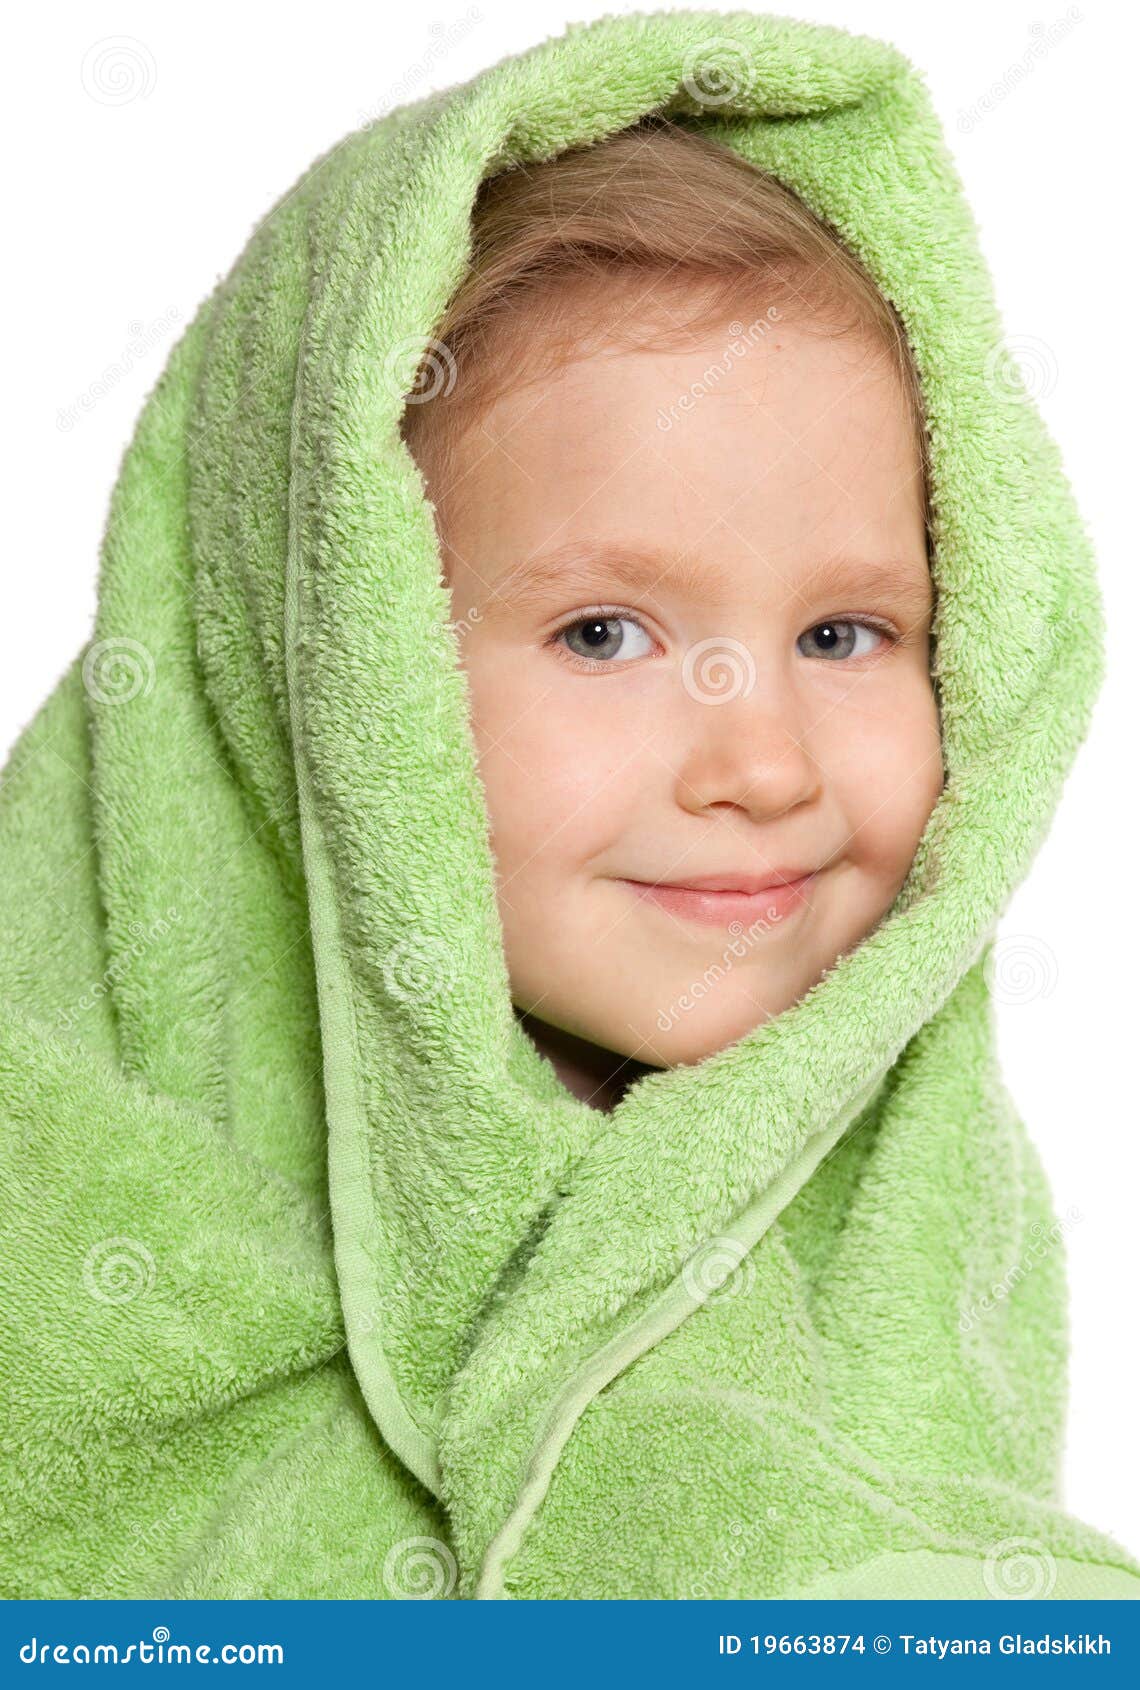 Girl In Bath Towel Stock Images - Image: 19663874